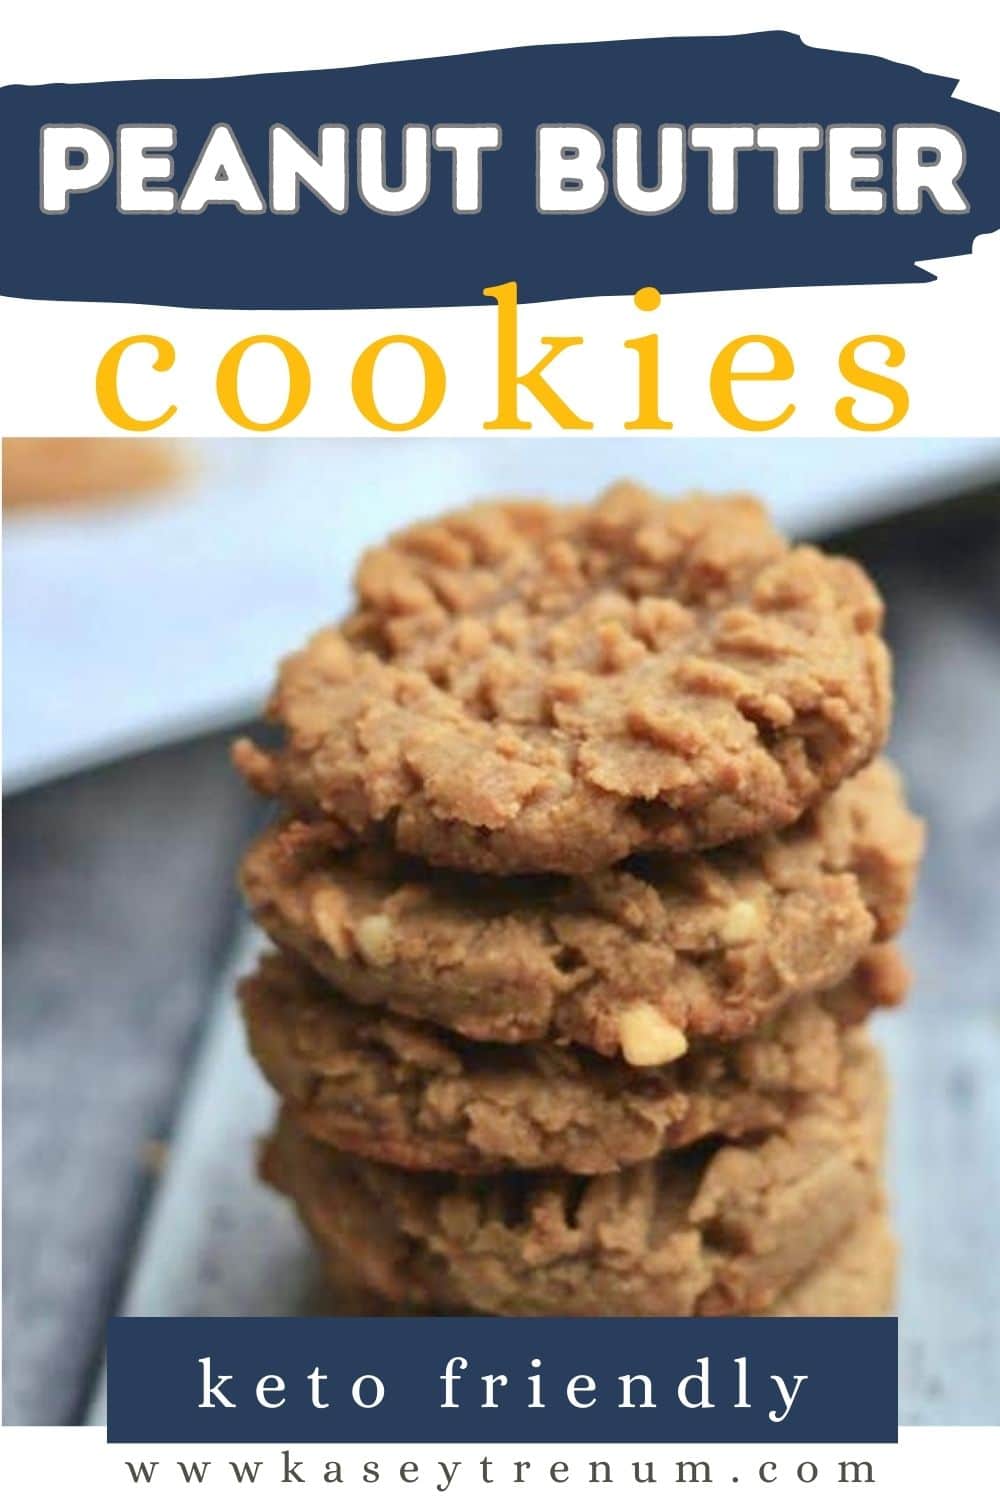 A close-up image of freshly baked keto peanut butter cookies. These cookies are light brown in color, with a soft and chewy texture that's perfect for satisfying your sweet tooth on a low-carb diet.